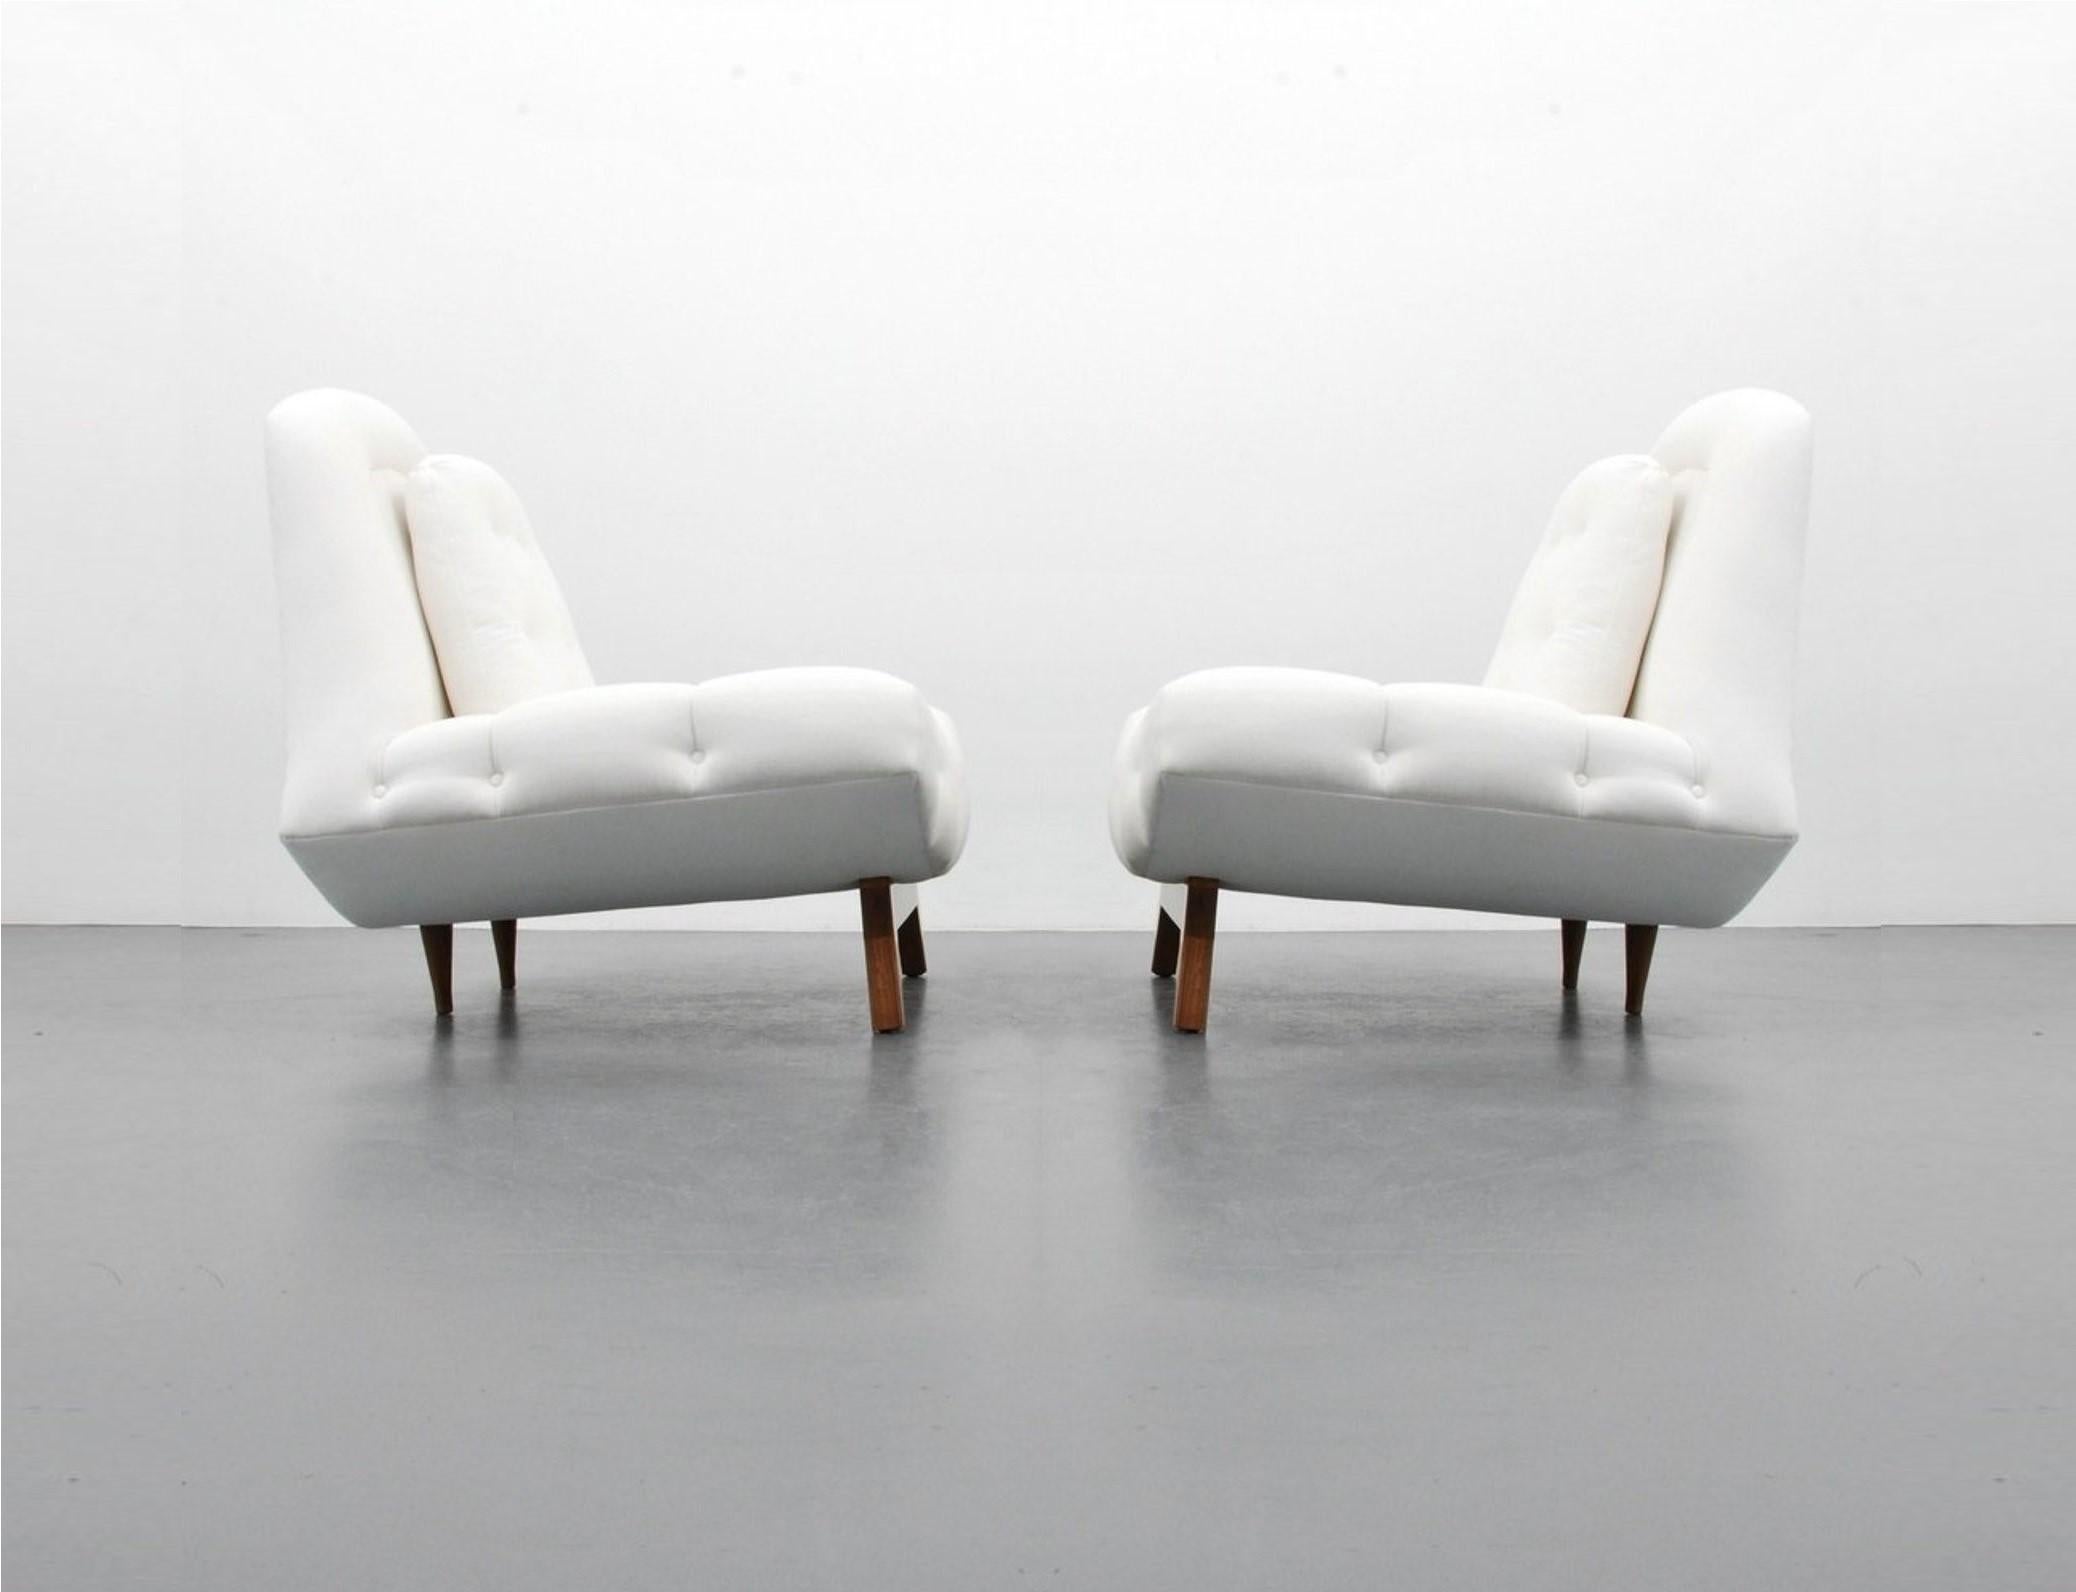 Adrian Pearsall 'Gondola' Button-Tufted Chairs for Craft Associates In Excellent Condition For Sale In Dallas, TX